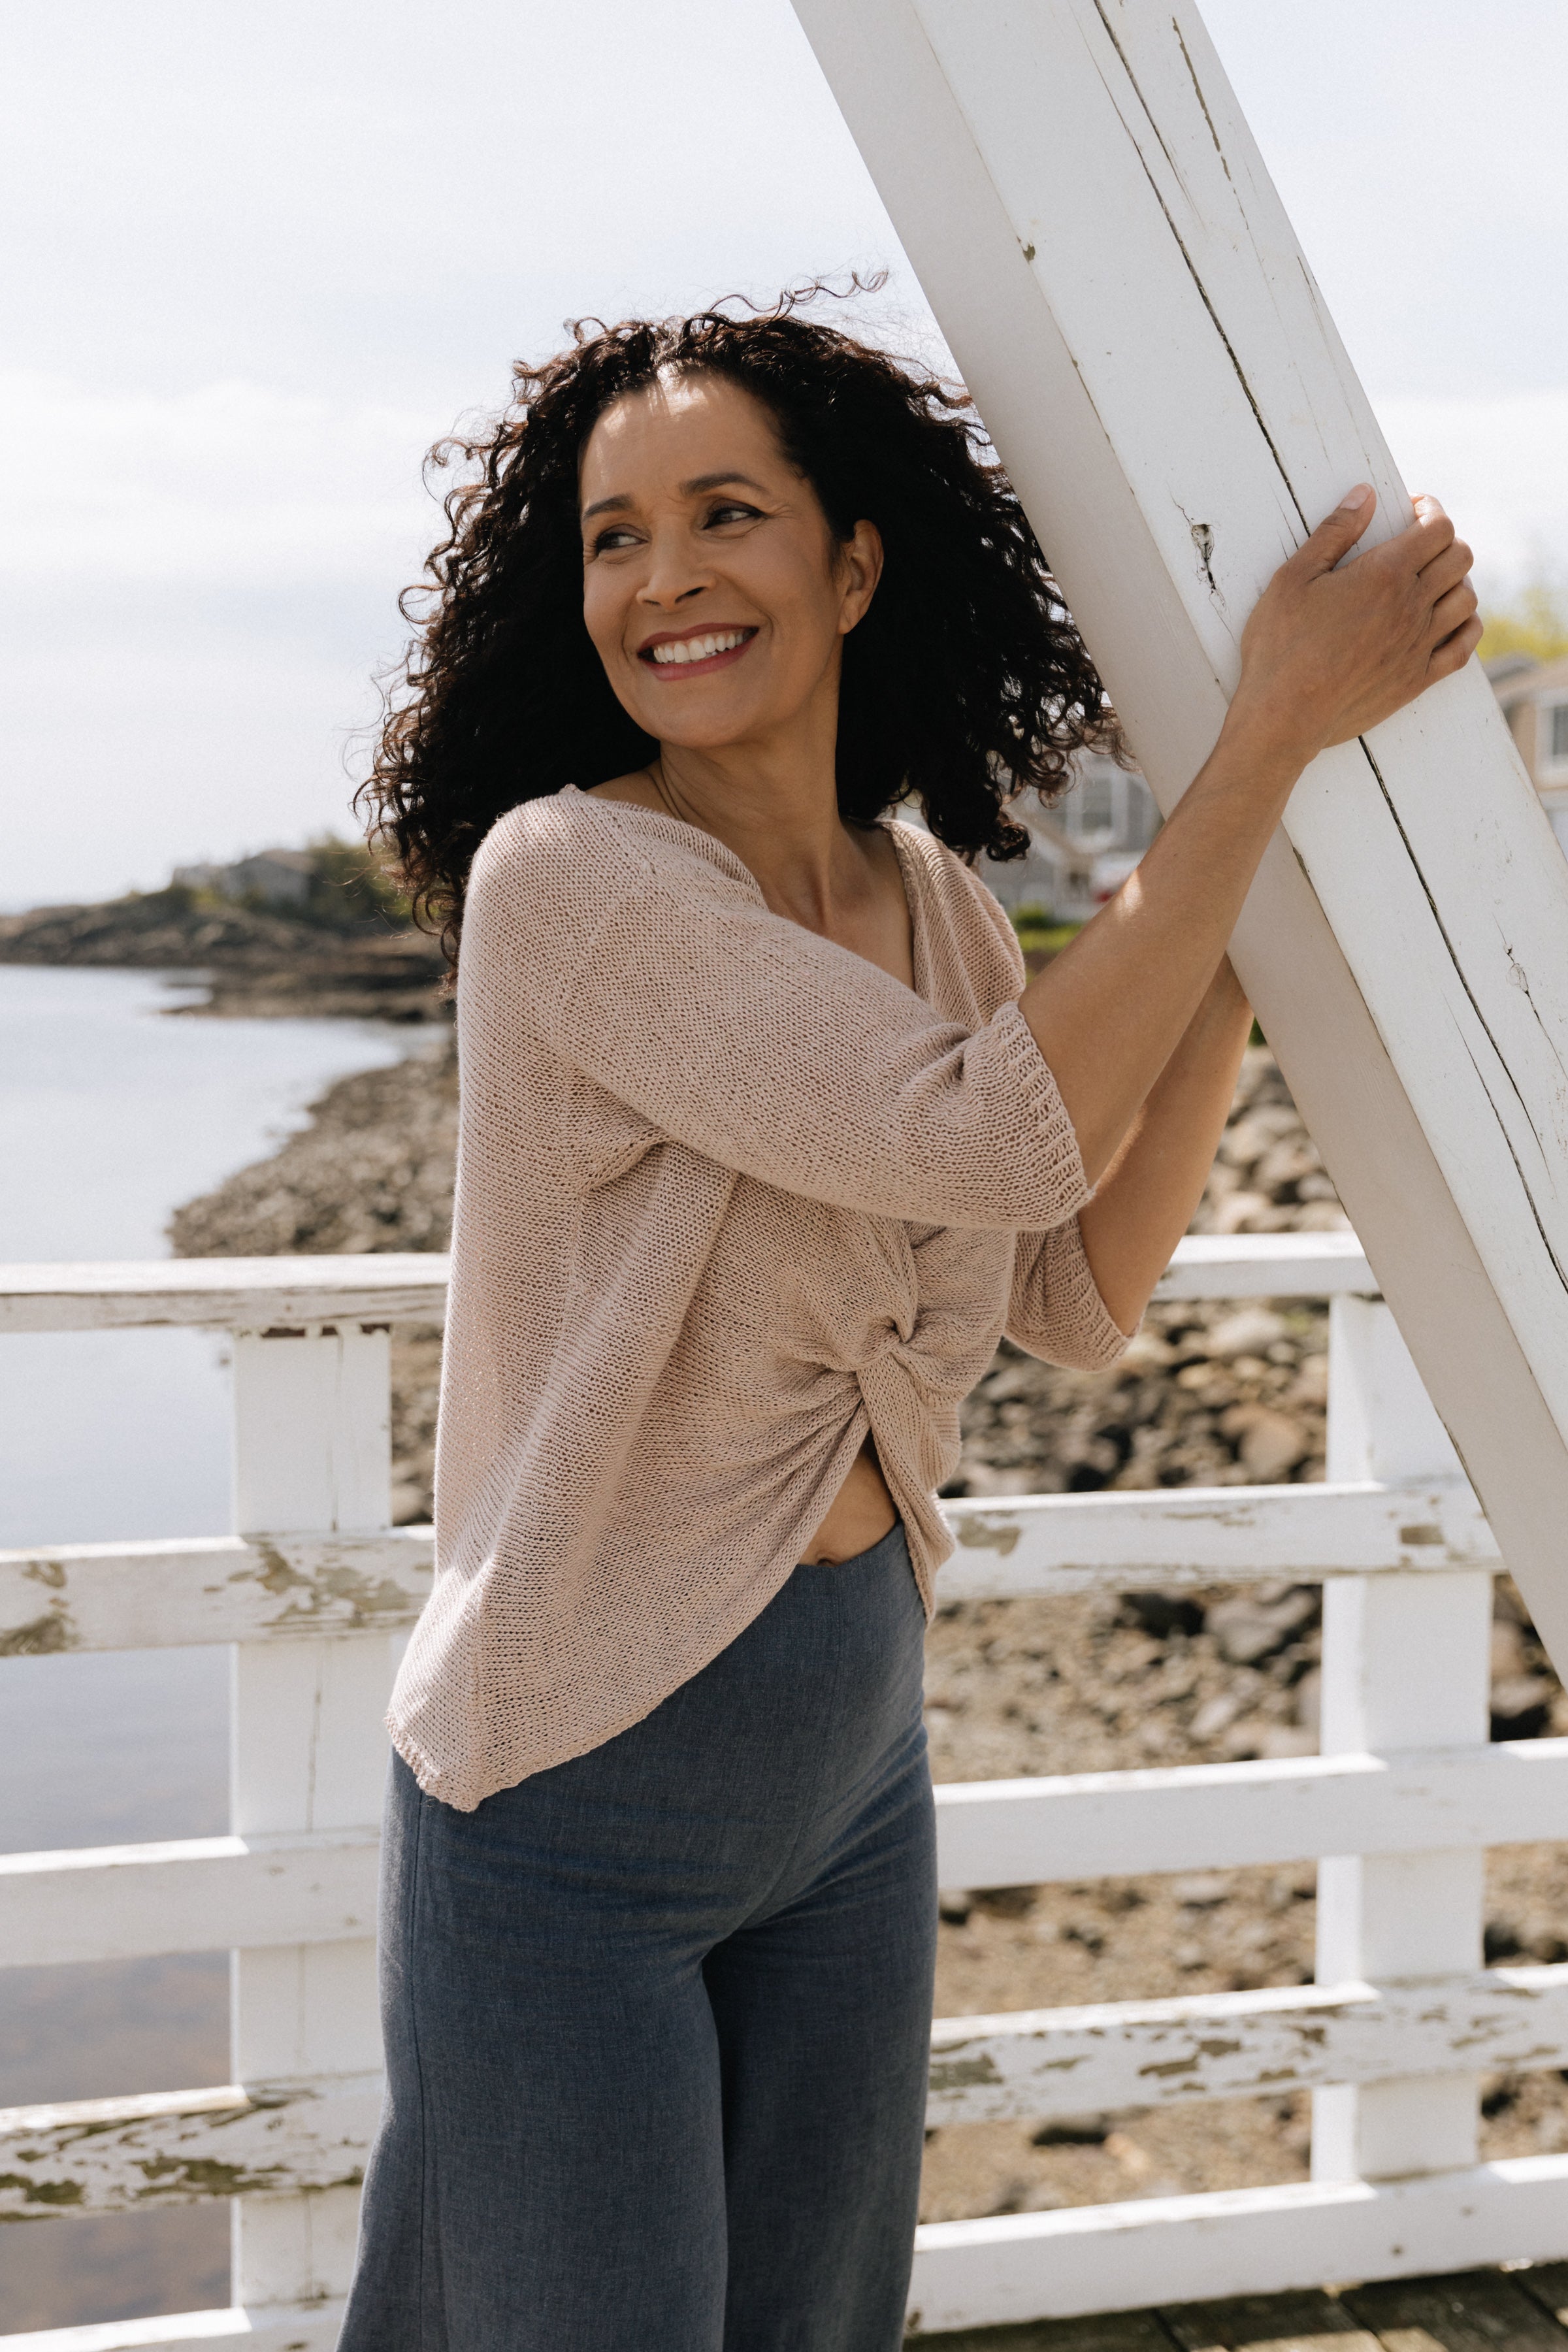 Lätta Top Knitting Pattern by Frances Othen-Wales – Quince & Co.